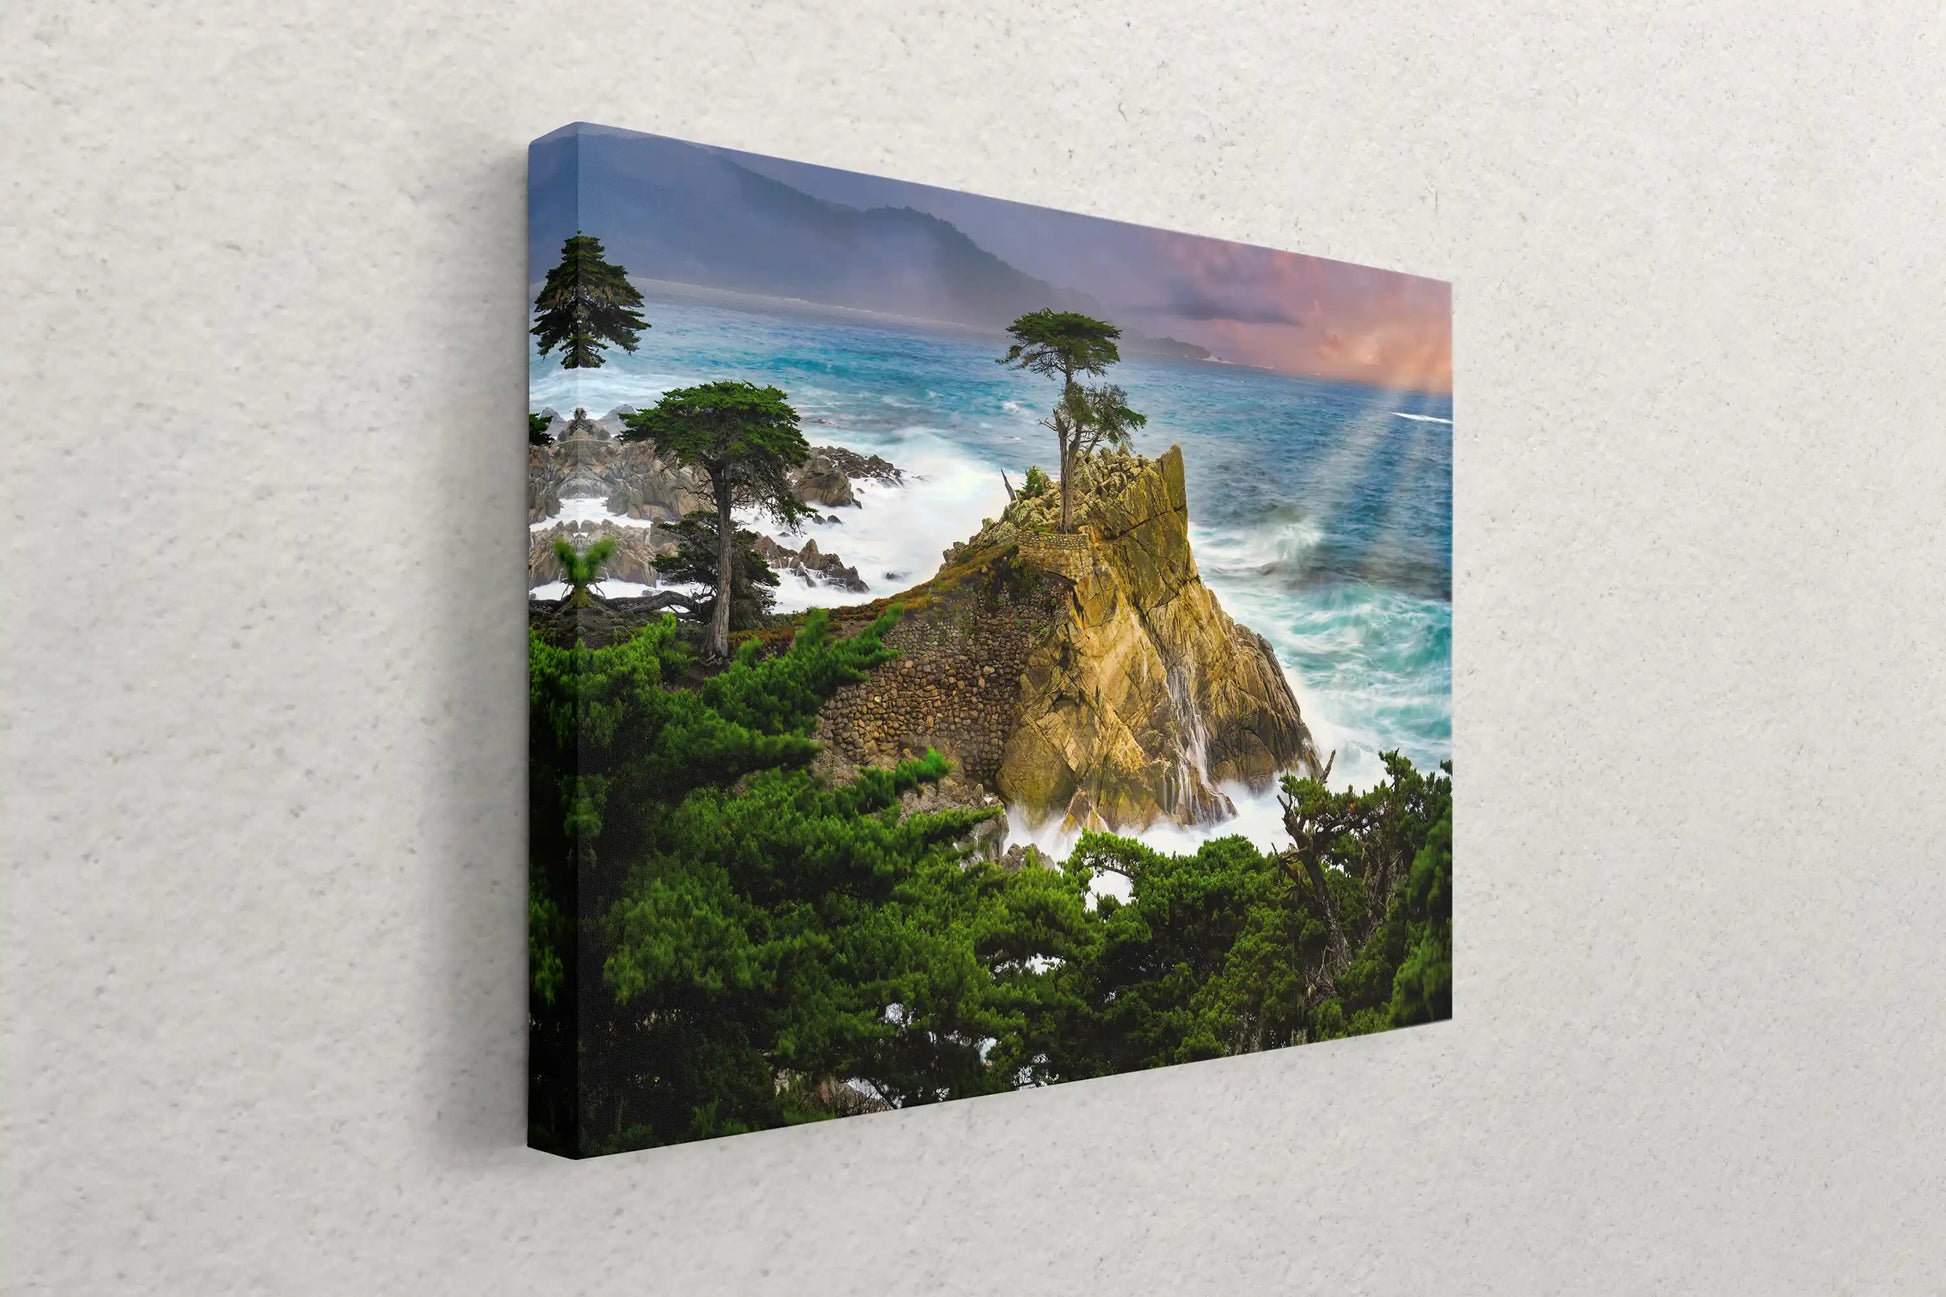 Lone Cypress Wall Decoration hanging on a wall